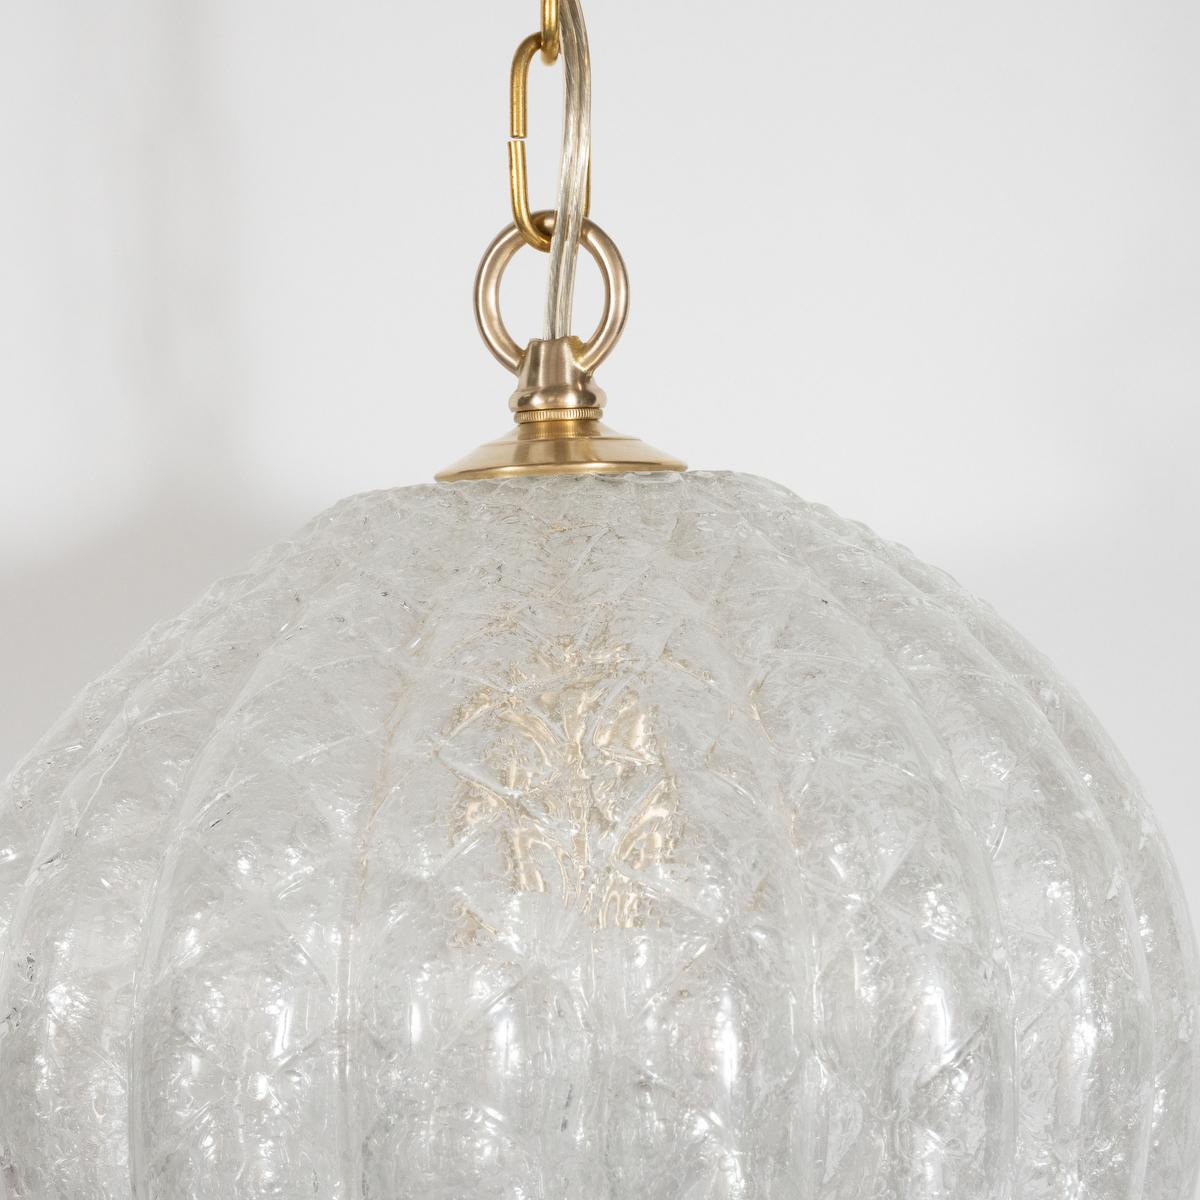 Mid-20th Century Murano Glass Bulb Form Pendant Fixture For Sale